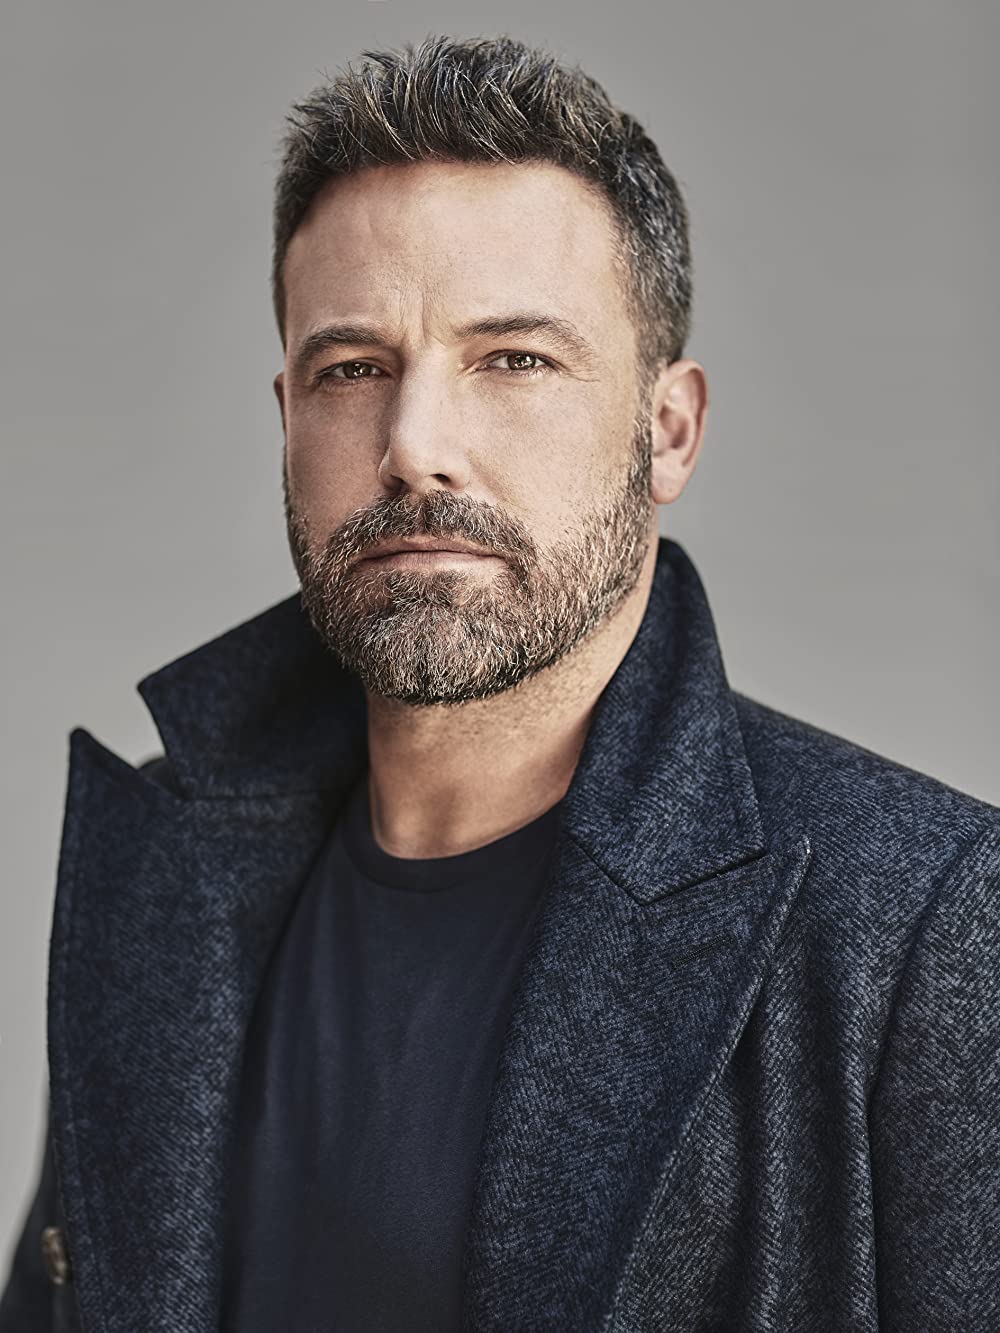 Ben Affleck: A Review of Recent Developments and Upcoming Projects